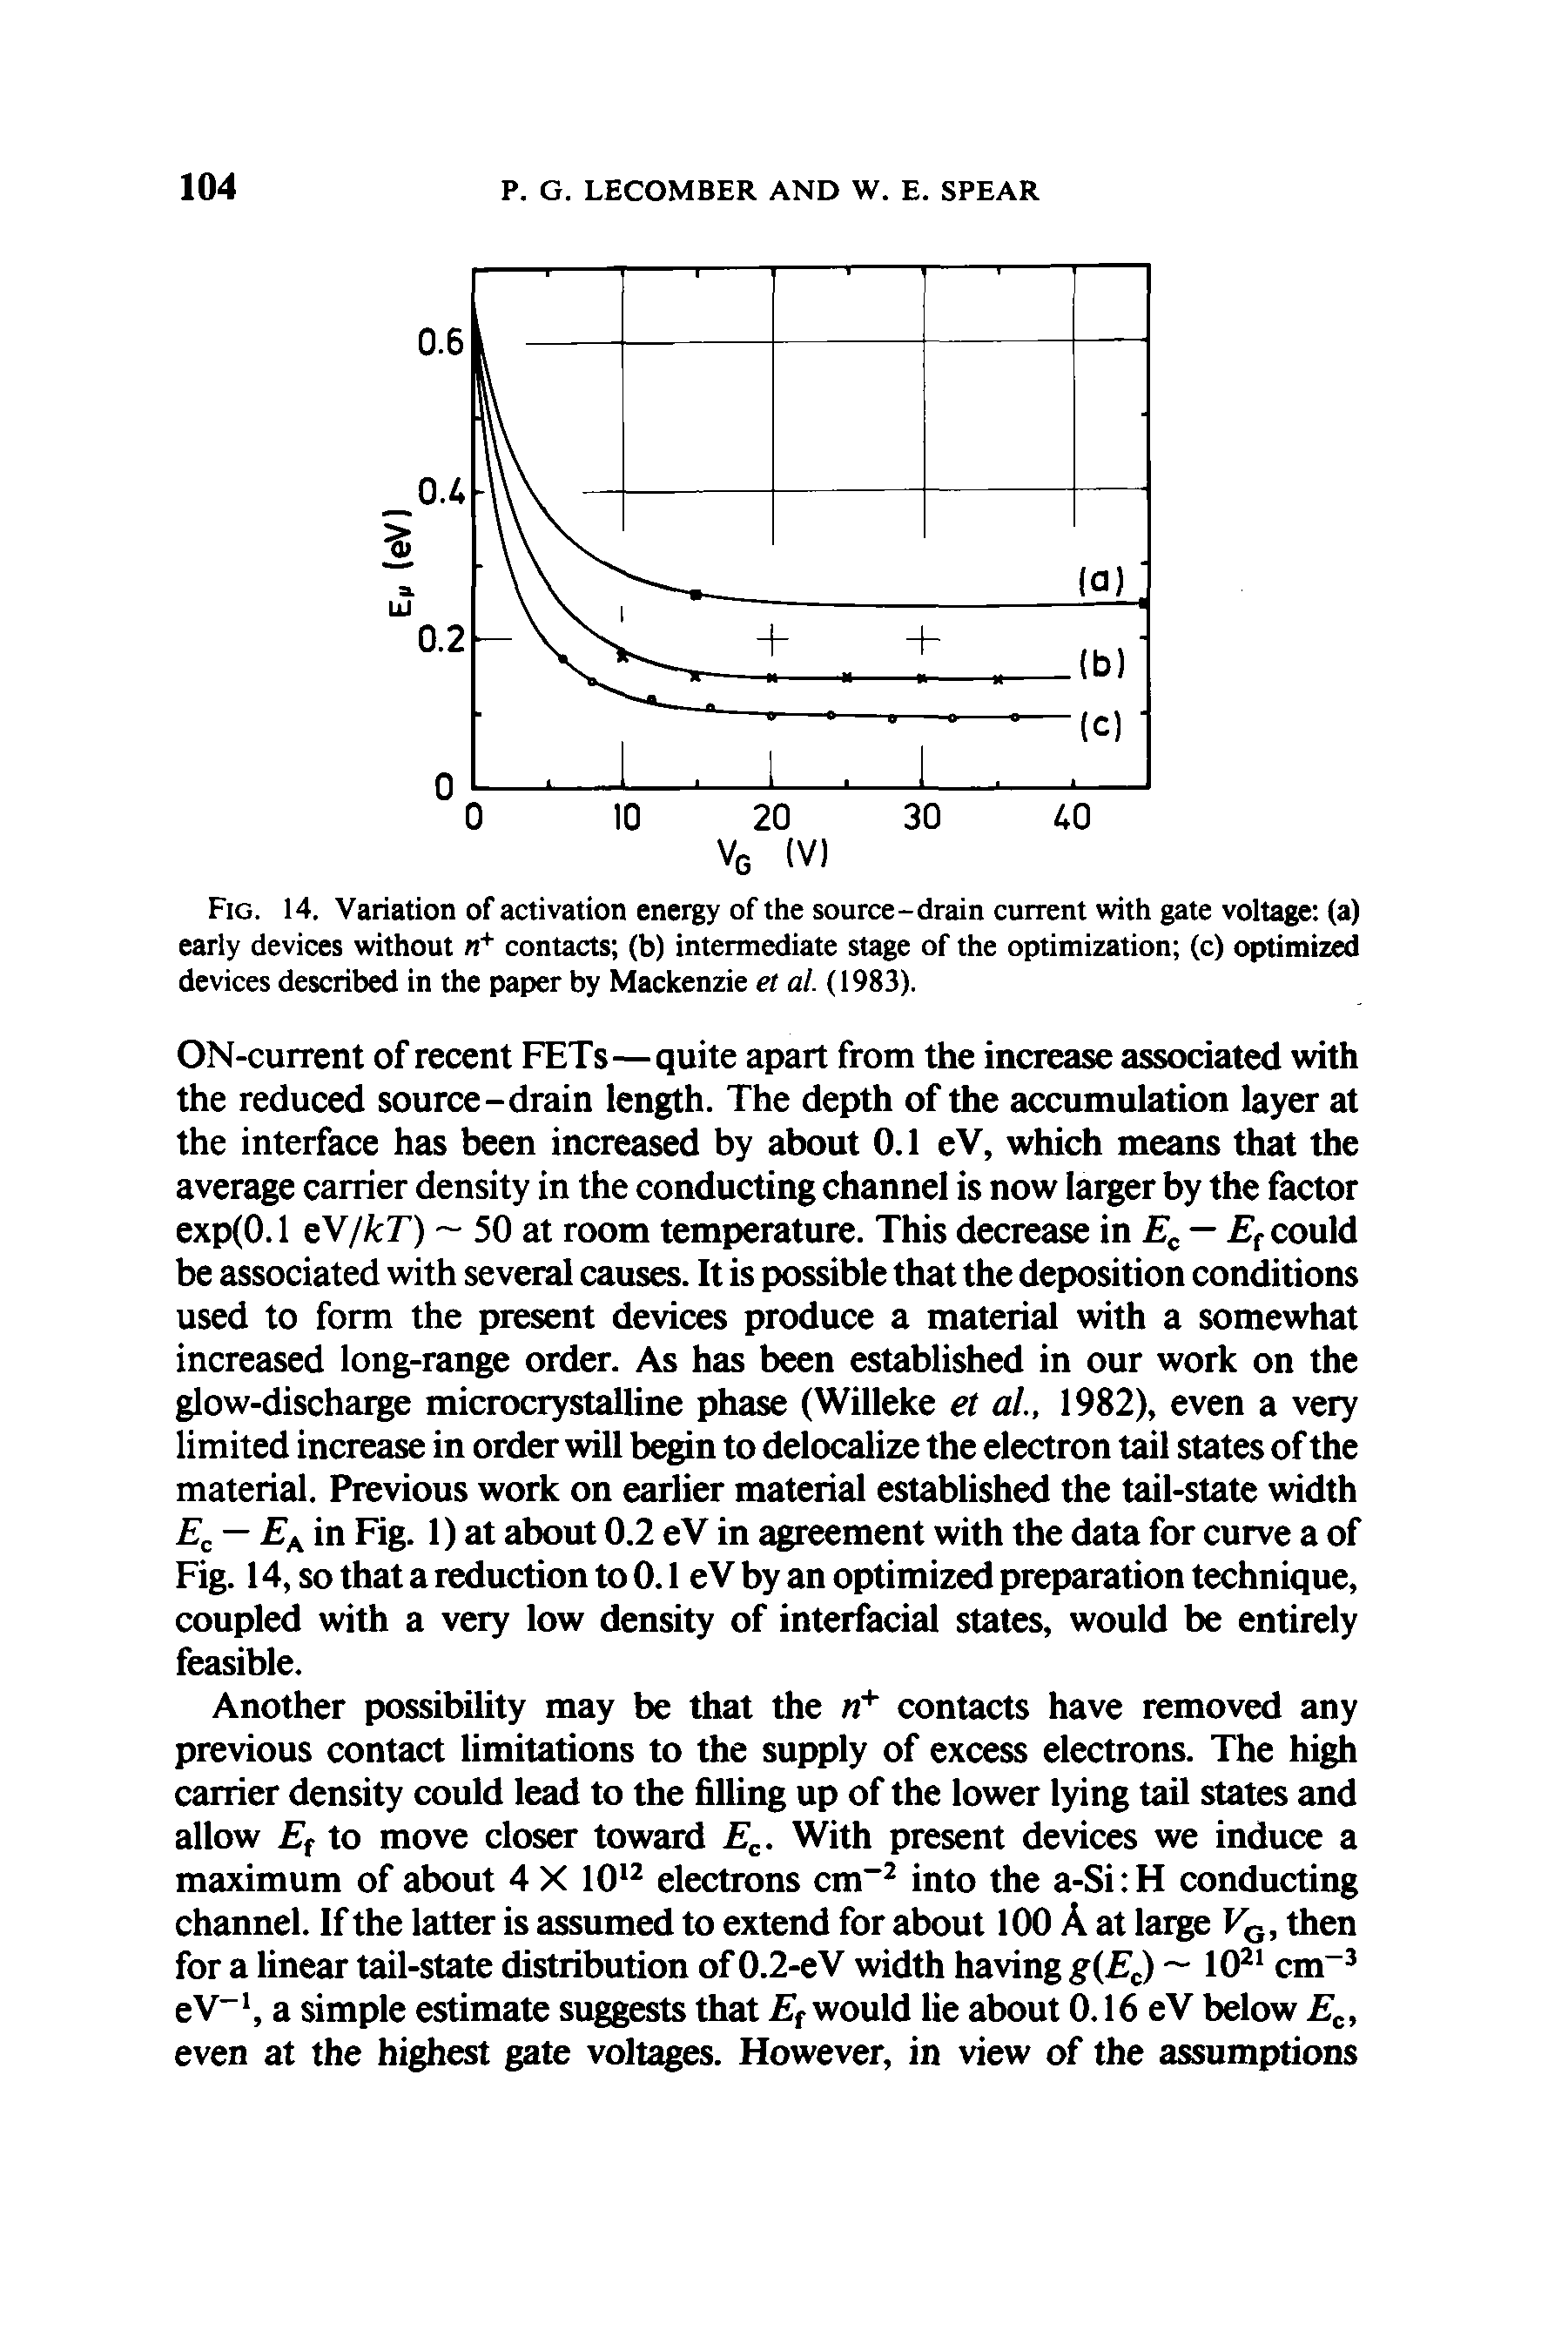 Fig. 14. Variation of activation energy of the source-drain current with gate voltage (a) early devices without n+ contacts (b) intermediate stage of the optimization (c) optimized devices described in the paper by Mackenzie et al. (1983).